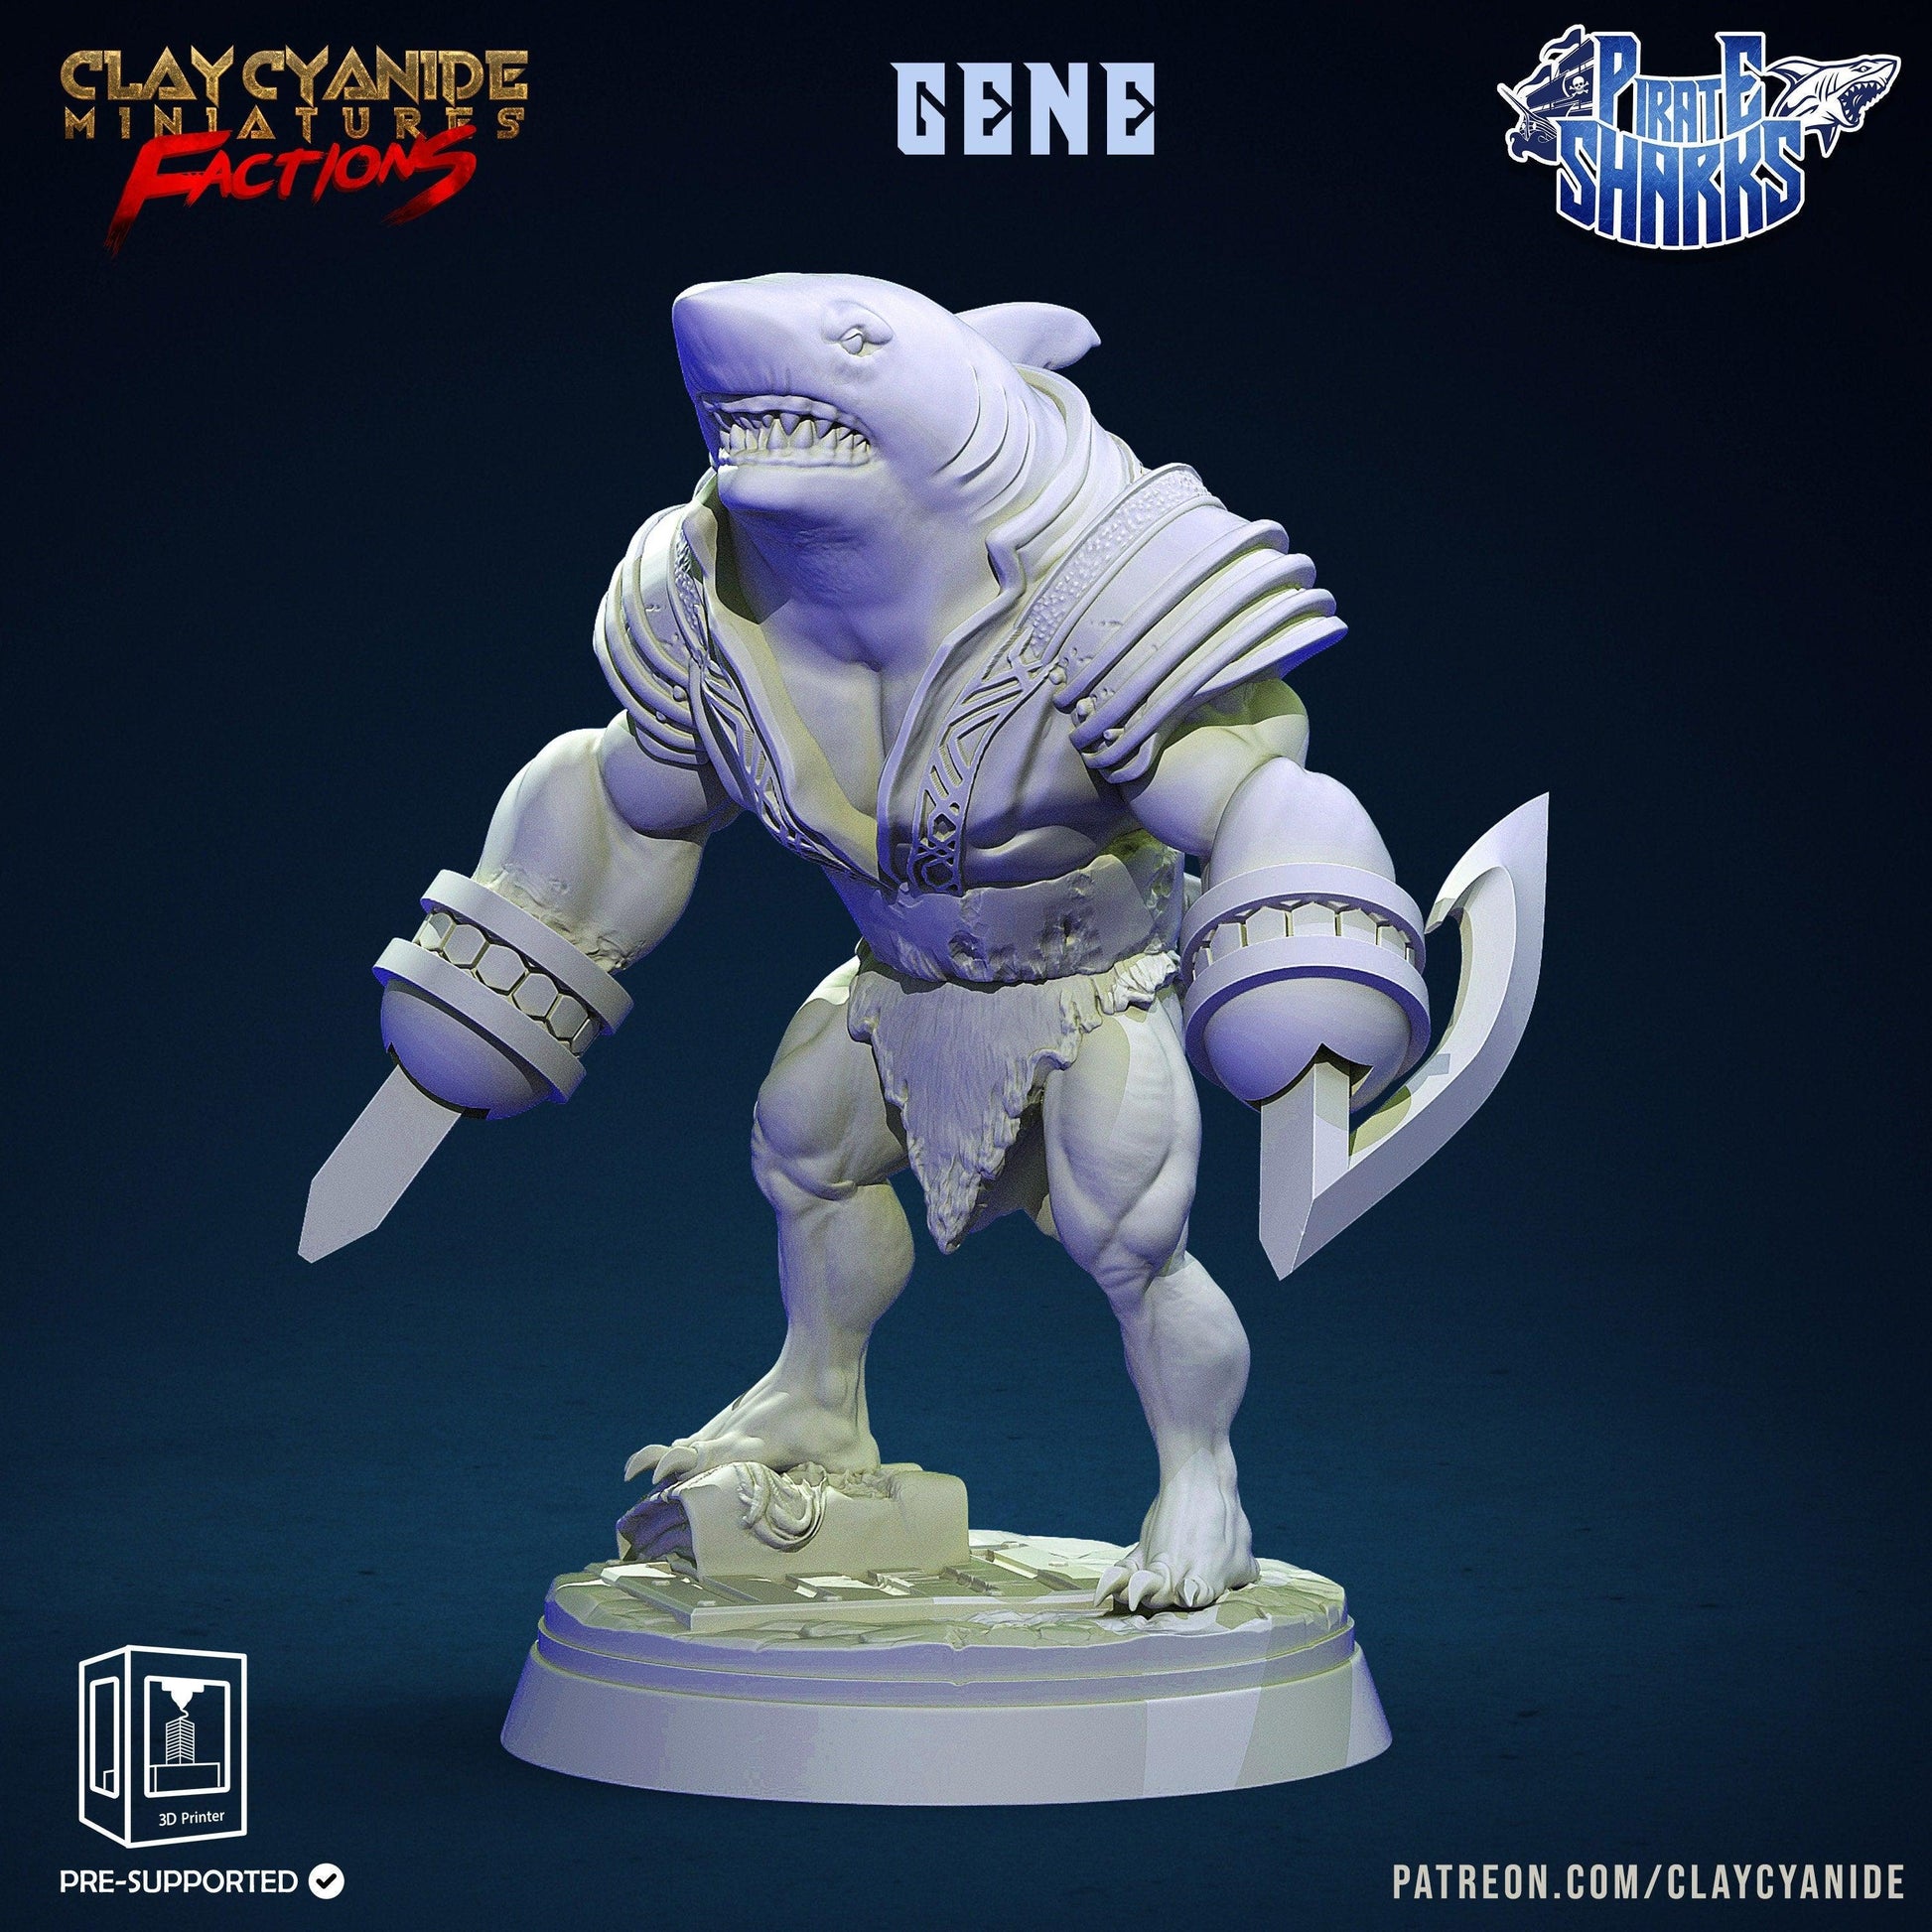 Gene, the Pirate Shark with a Shank and Modified Weapon Miniature | Sneak Attack DnD Miniature | Pirate 32mm Scale - Plague Miniatures shop for DnD Miniatures